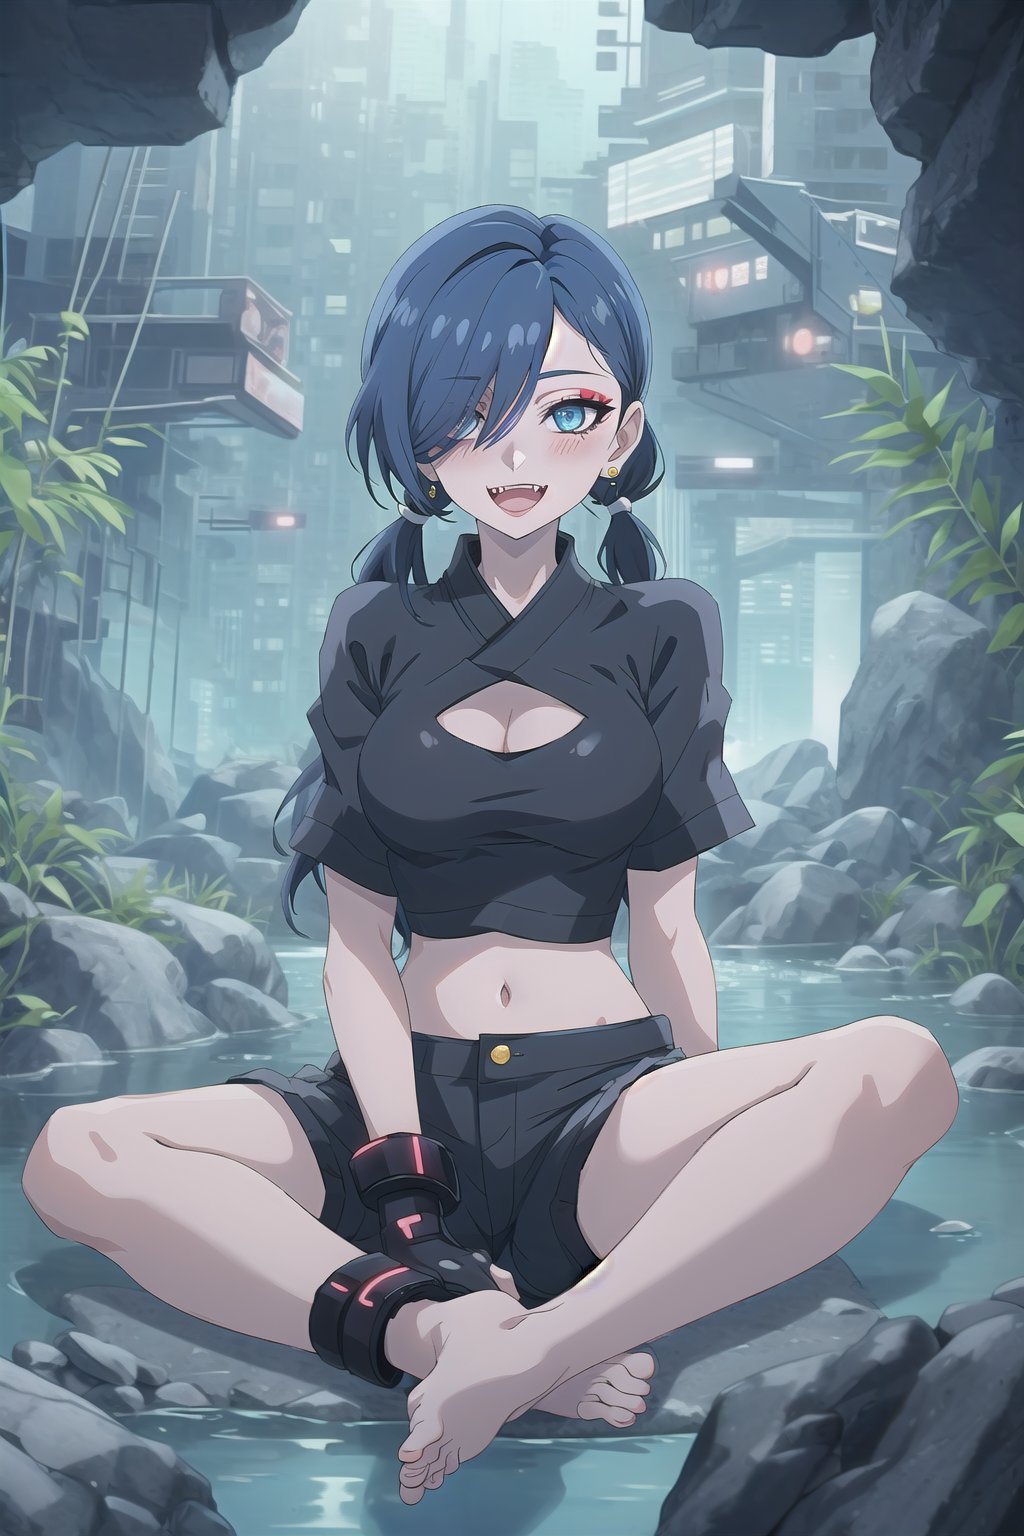 nier anime style illustration, best quality, masterpiece High resolution, good detail, bright colors, HDR, 4K. Dolby vision high. 

Girl with long straight black hair, long twin pigtails (hair covering one eye), blue eyes, blushing, blue earrings 

Stylish Cyberpunk Black Crop Top 

Showing navel, exposed navel 

Elegant cyberpunk black shorts

Barefoot

Inside an underground cave 

Blue illumination in the depth of underground water 

Sitting on a rock 

Black Stylish Fingerless Cyberpunk Gloves

Blue natural lighting

Flirty smile (yandere smile). Happy, excited. Open mouth 

Showing fangs, exposed fangs

jirai kei makeup

jirai kei makeup

Black hair

Inside an underground cave

Showing fangs, exposed fangs
